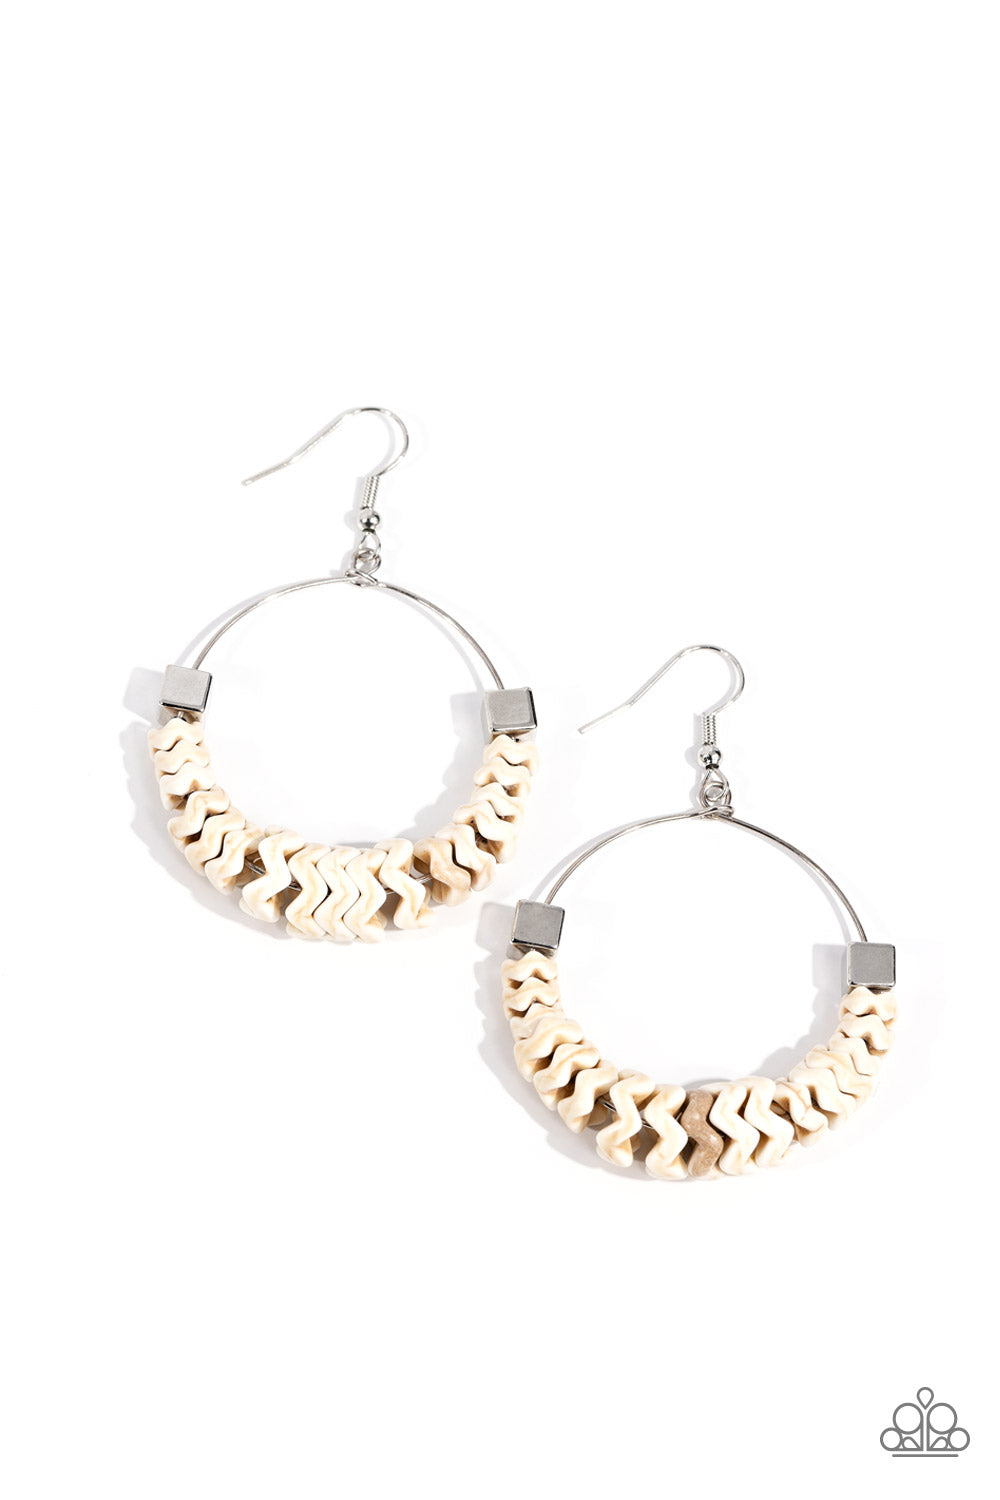 Capriciously Crimped - white - Paparazzi earrings